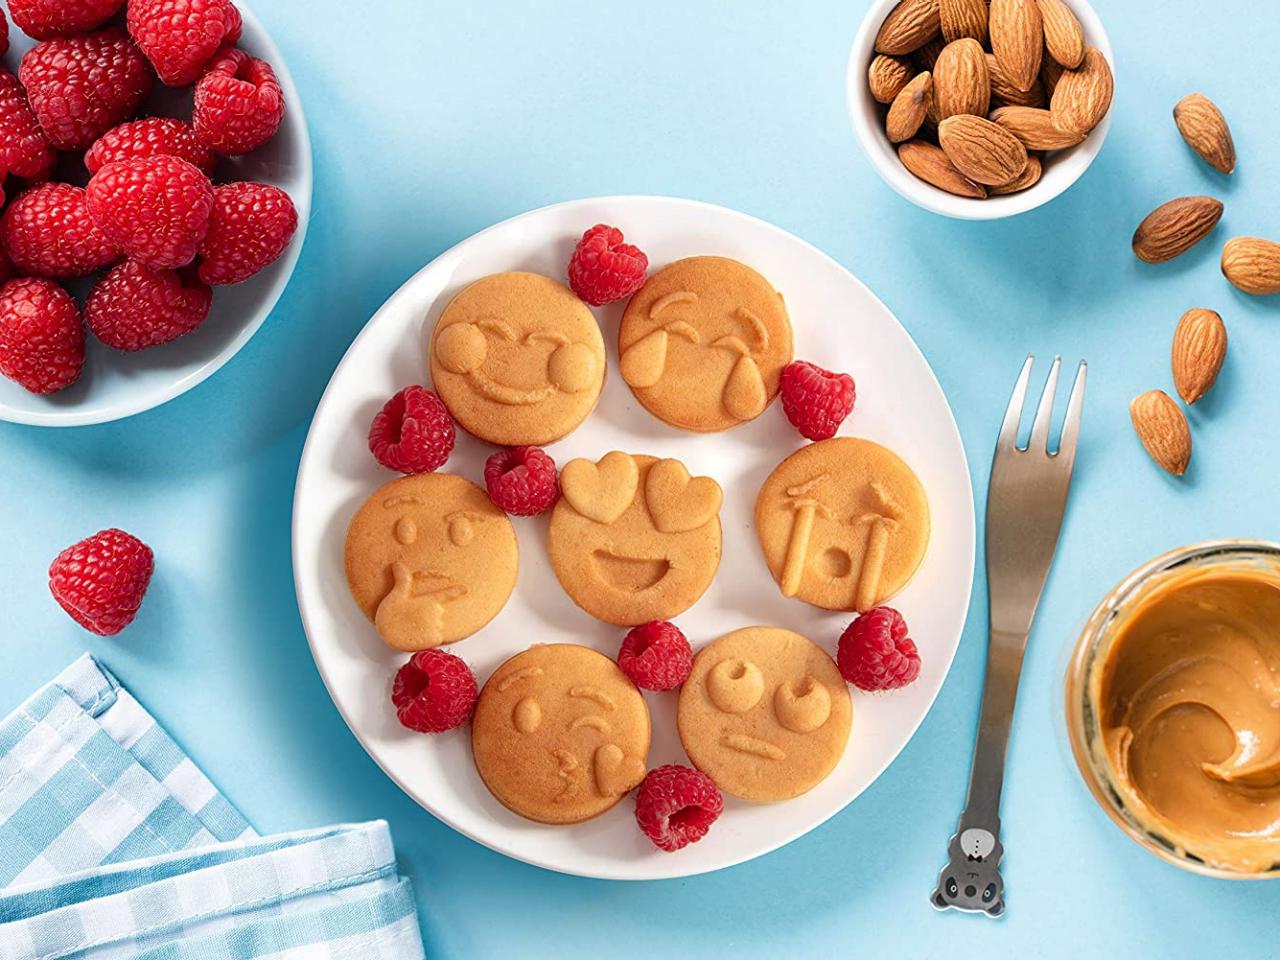 https://food.fnr.sndimg.com/content/dam/images/food/products/2021/2/12/rx_mini-emojis-smiley-faces-waffle-maker.jpeg.rend.hgtvcom.1280.960.suffix/1613144766648.jpeg